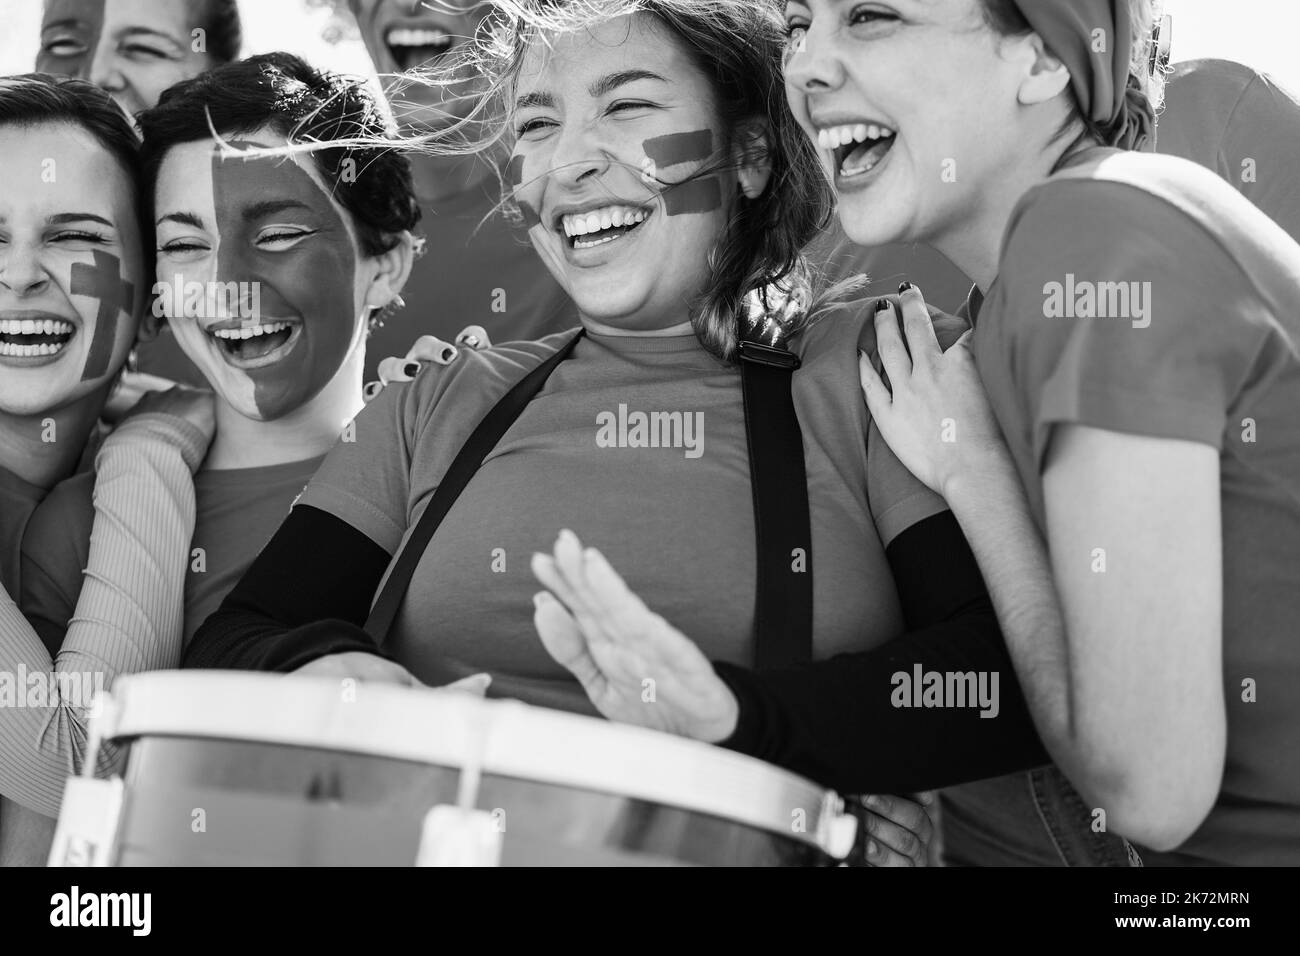 Multiracial red sport football fans screaming while supporting their team - Focus on center girl face - Black and white editing Stock Photo